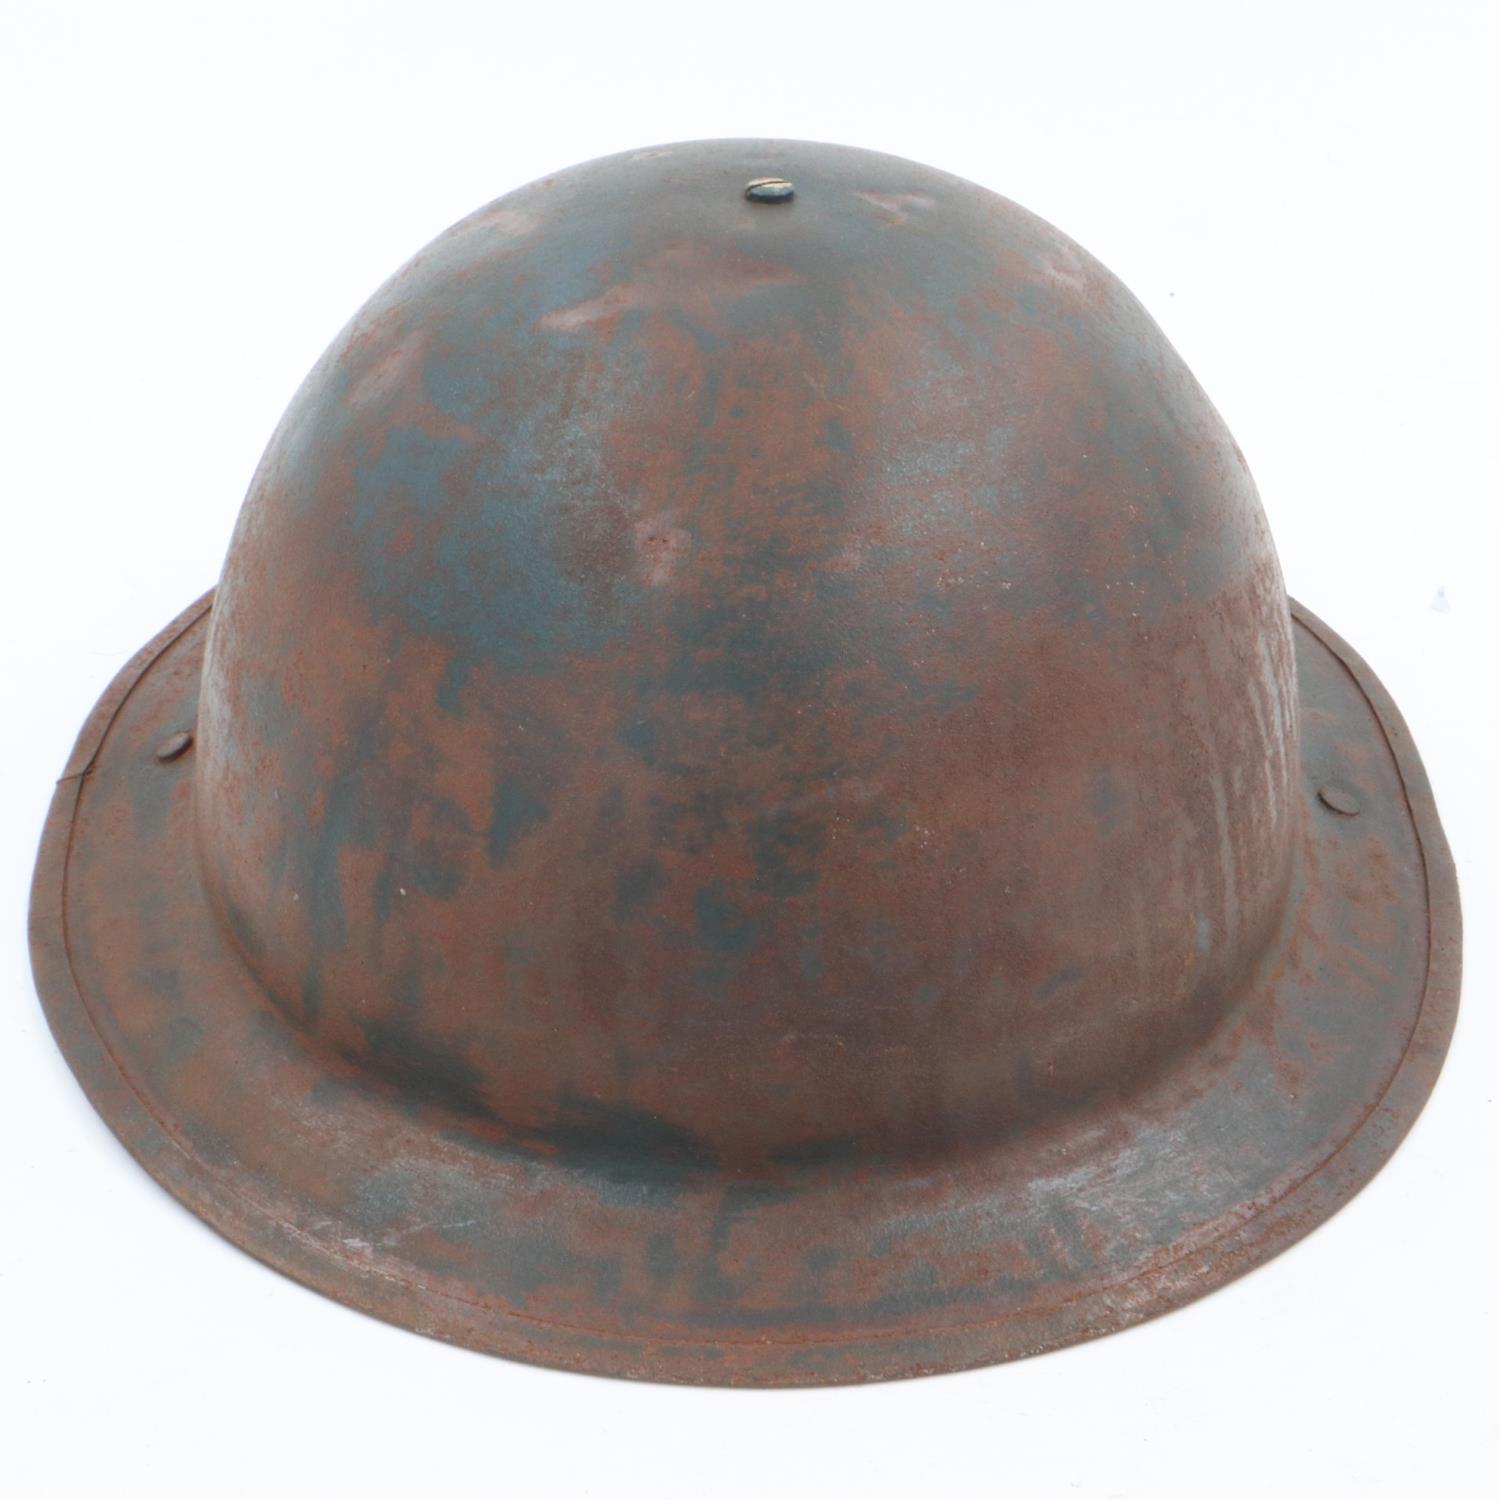 WWII British home front private purchase “Tin Bowler” Helmet for Boots the Chemist Staff. UK P&P - Image 3 of 5